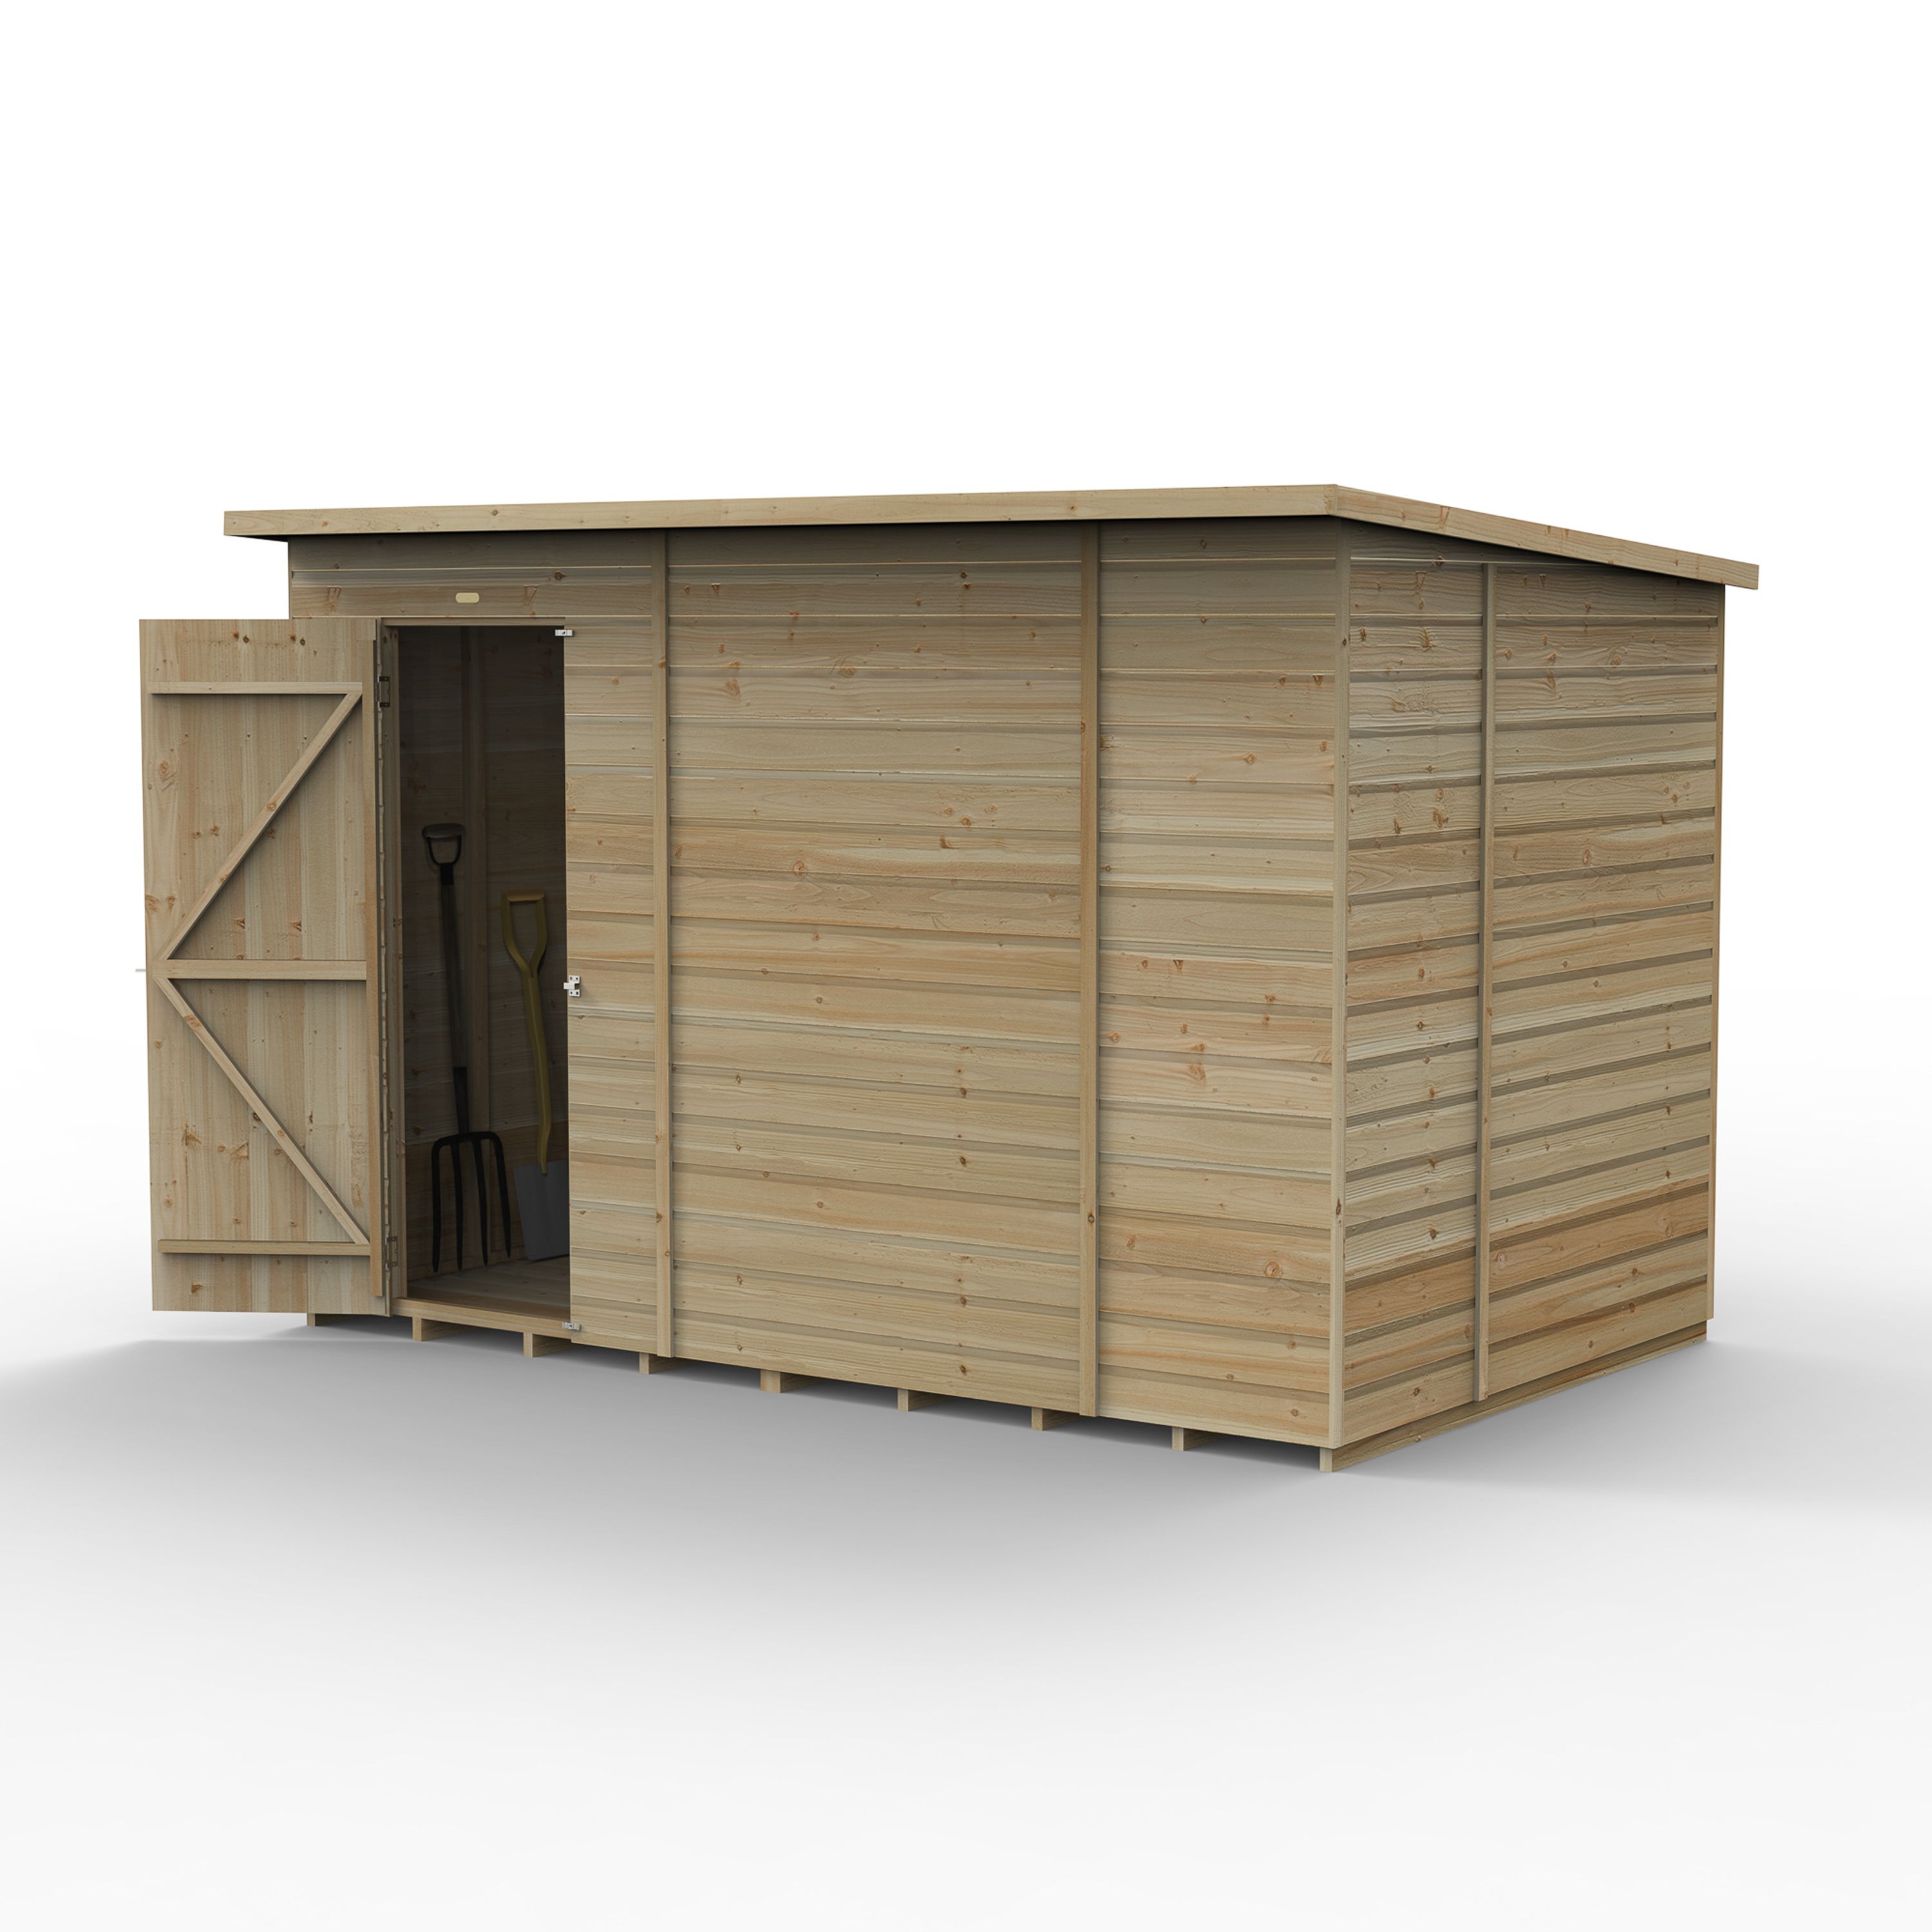 Forest Garden Beckwood 10x6 ft Pent Natural timber Wooden 2 door Shed with floor (Base included) - Assembly not required